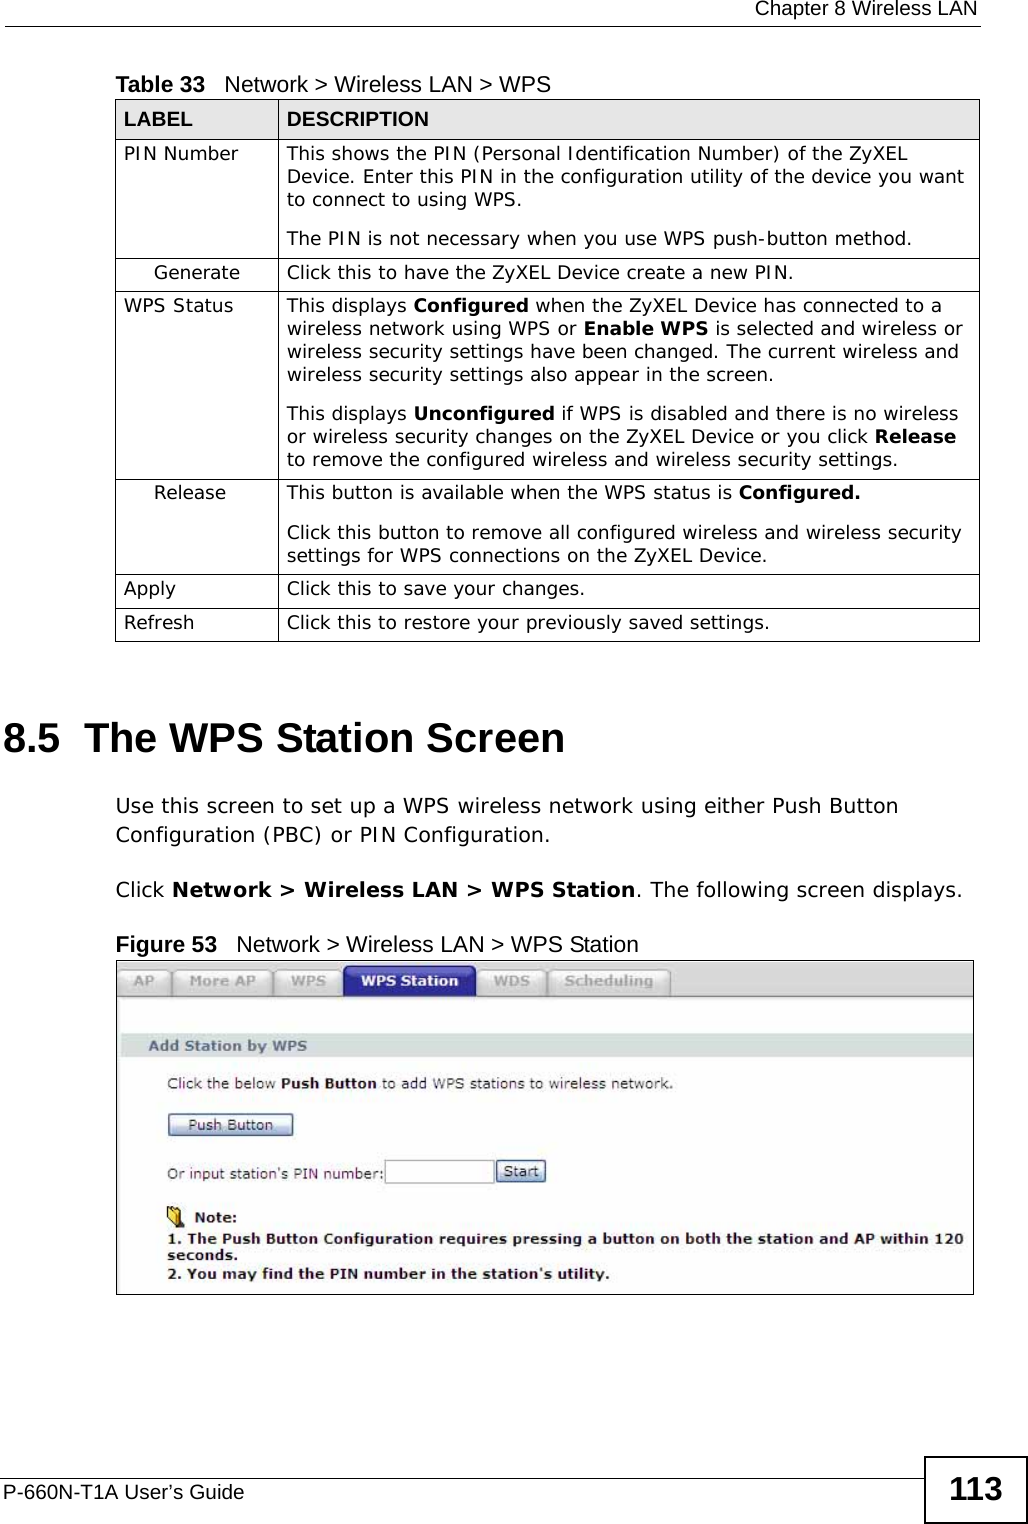  Chapter 8 Wireless LANP-660N-T1A User’s Guide 1138.5  The WPS Station ScreenUse this screen to set up a WPS wireless network using either Push Button Configuration (PBC) or PIN Configuration.Click Network &gt; Wireless LAN &gt; WPS Station. The following screen displays.Figure 53   Network &gt; Wireless LAN &gt; WPS StationPIN Number This shows the PIN (Personal Identification Number) of the ZyXEL Device. Enter this PIN in the configuration utility of the device you want to connect to using WPS.The PIN is not necessary when you use WPS push-button method.Generate Click this to have the ZyXEL Device create a new PIN. WPS Status This displays Configured when the ZyXEL Device has connected to a wireless network using WPS or Enable WPS is selected and wireless or wireless security settings have been changed. The current wireless and wireless security settings also appear in the screen.This displays Unconfigured if WPS is disabled and there is no wireless or wireless security changes on the ZyXEL Device or you click Release to remove the configured wireless and wireless security settings.Release This button is available when the WPS status is Configured.Click this button to remove all configured wireless and wireless security settings for WPS connections on the ZyXEL Device.Apply Click this to save your changes.Refresh Click this to restore your previously saved settings.Table 33   Network &gt; Wireless LAN &gt; WPSLABEL DESCRIPTION